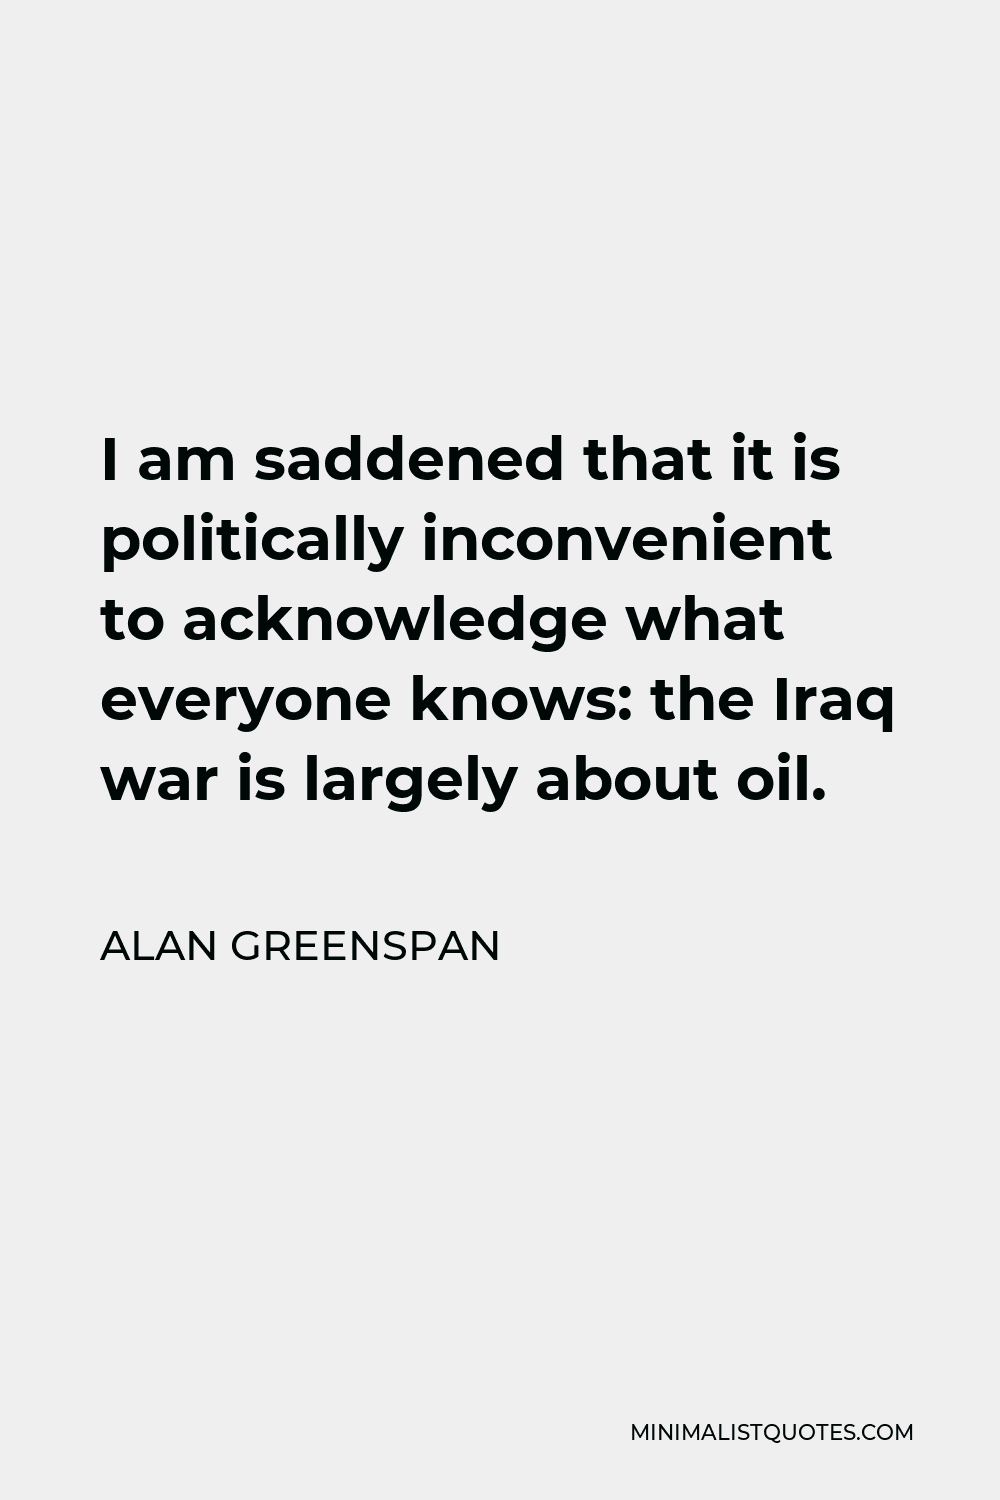 Alan Greenspan Quote - I am saddened that it is politically inconvenient to acknowledge what everyone knows: the Iraq war is largely about oil.